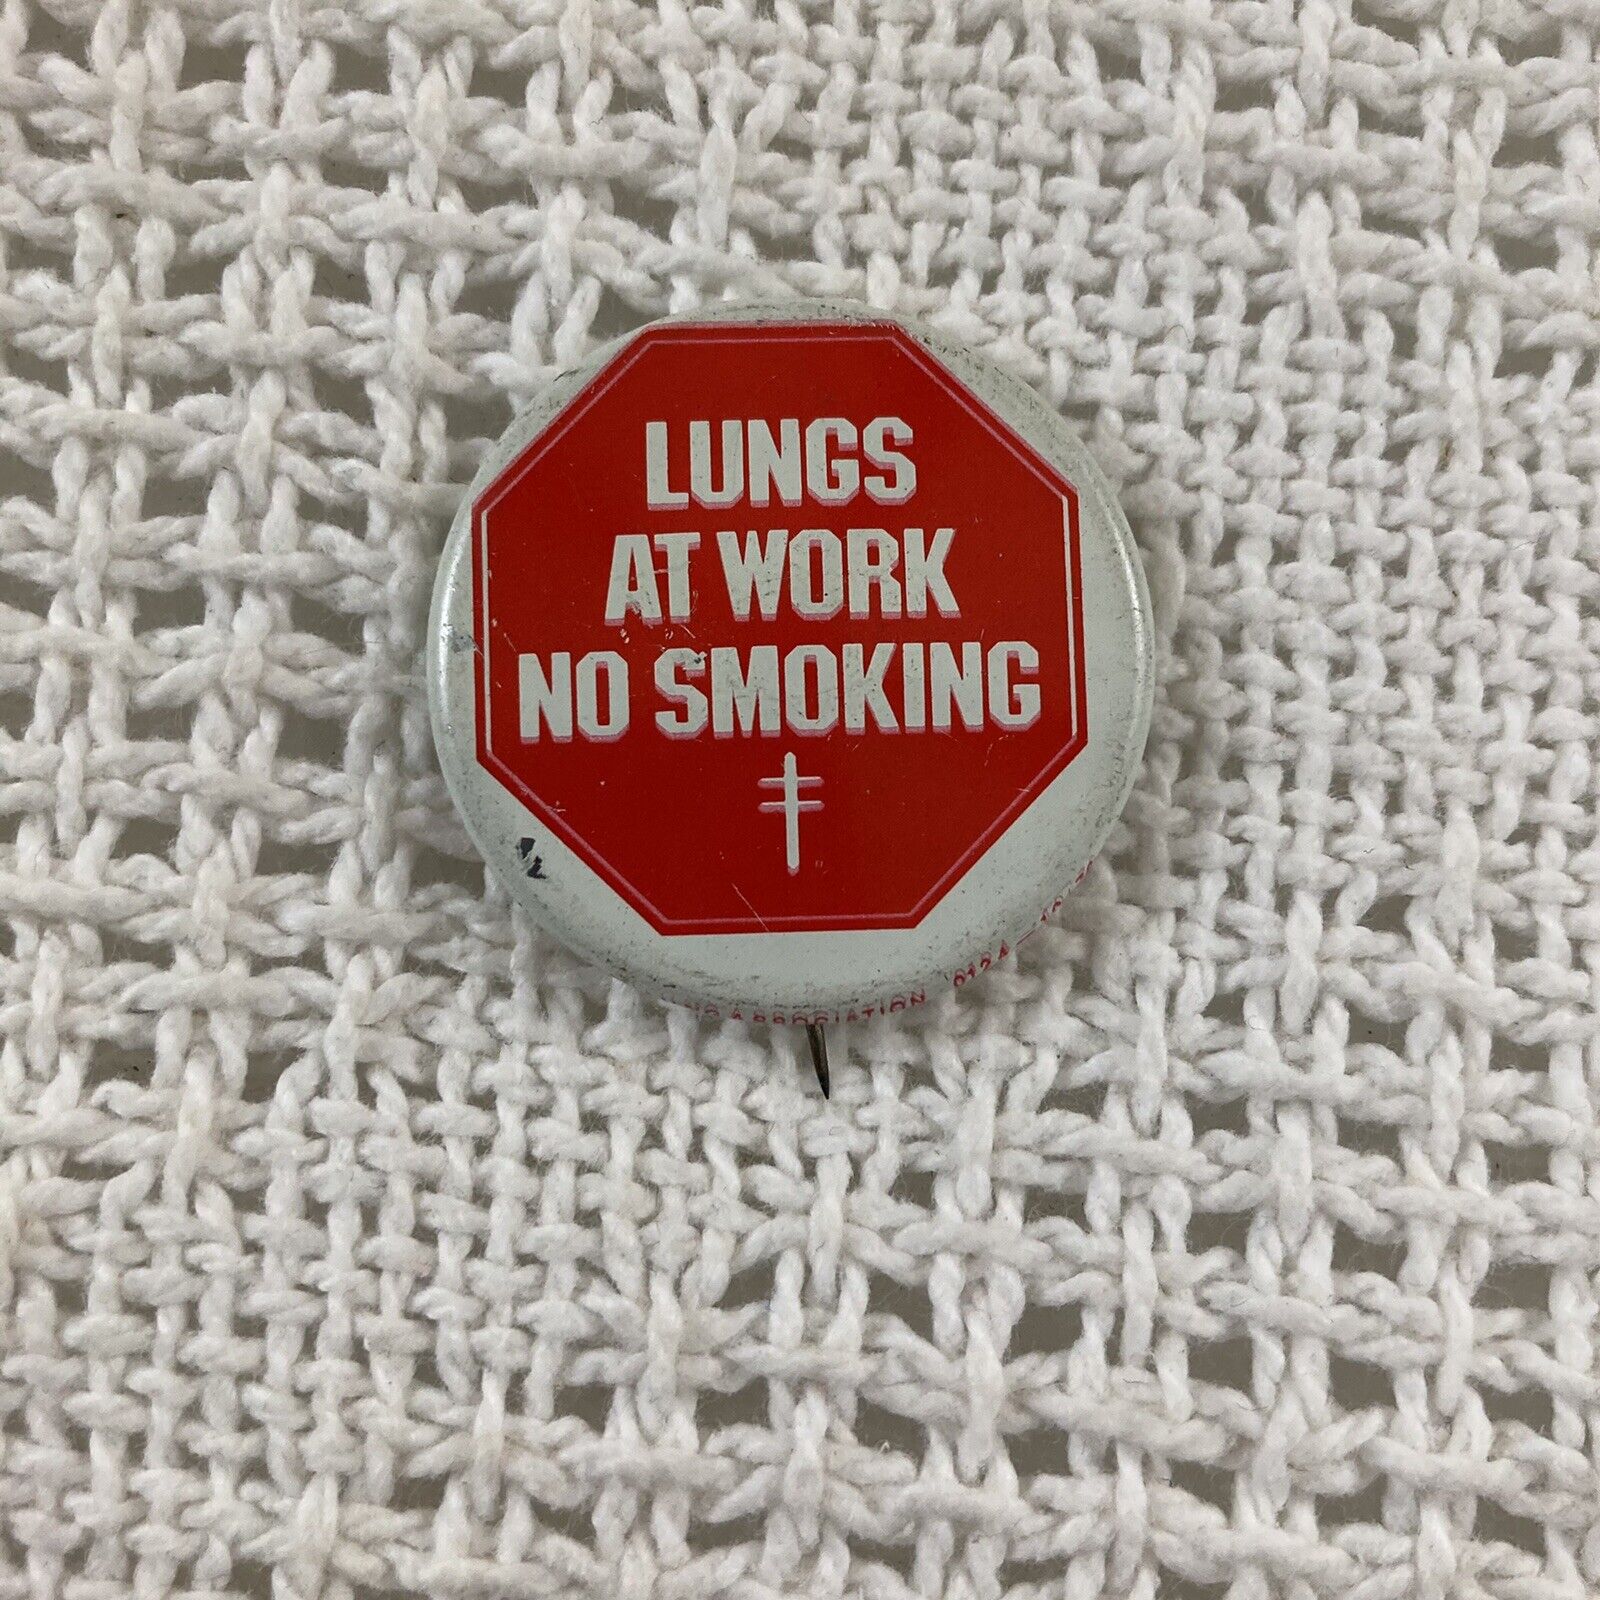 American Lung Association Lungs at Work No Smoking Vintage Button Pin